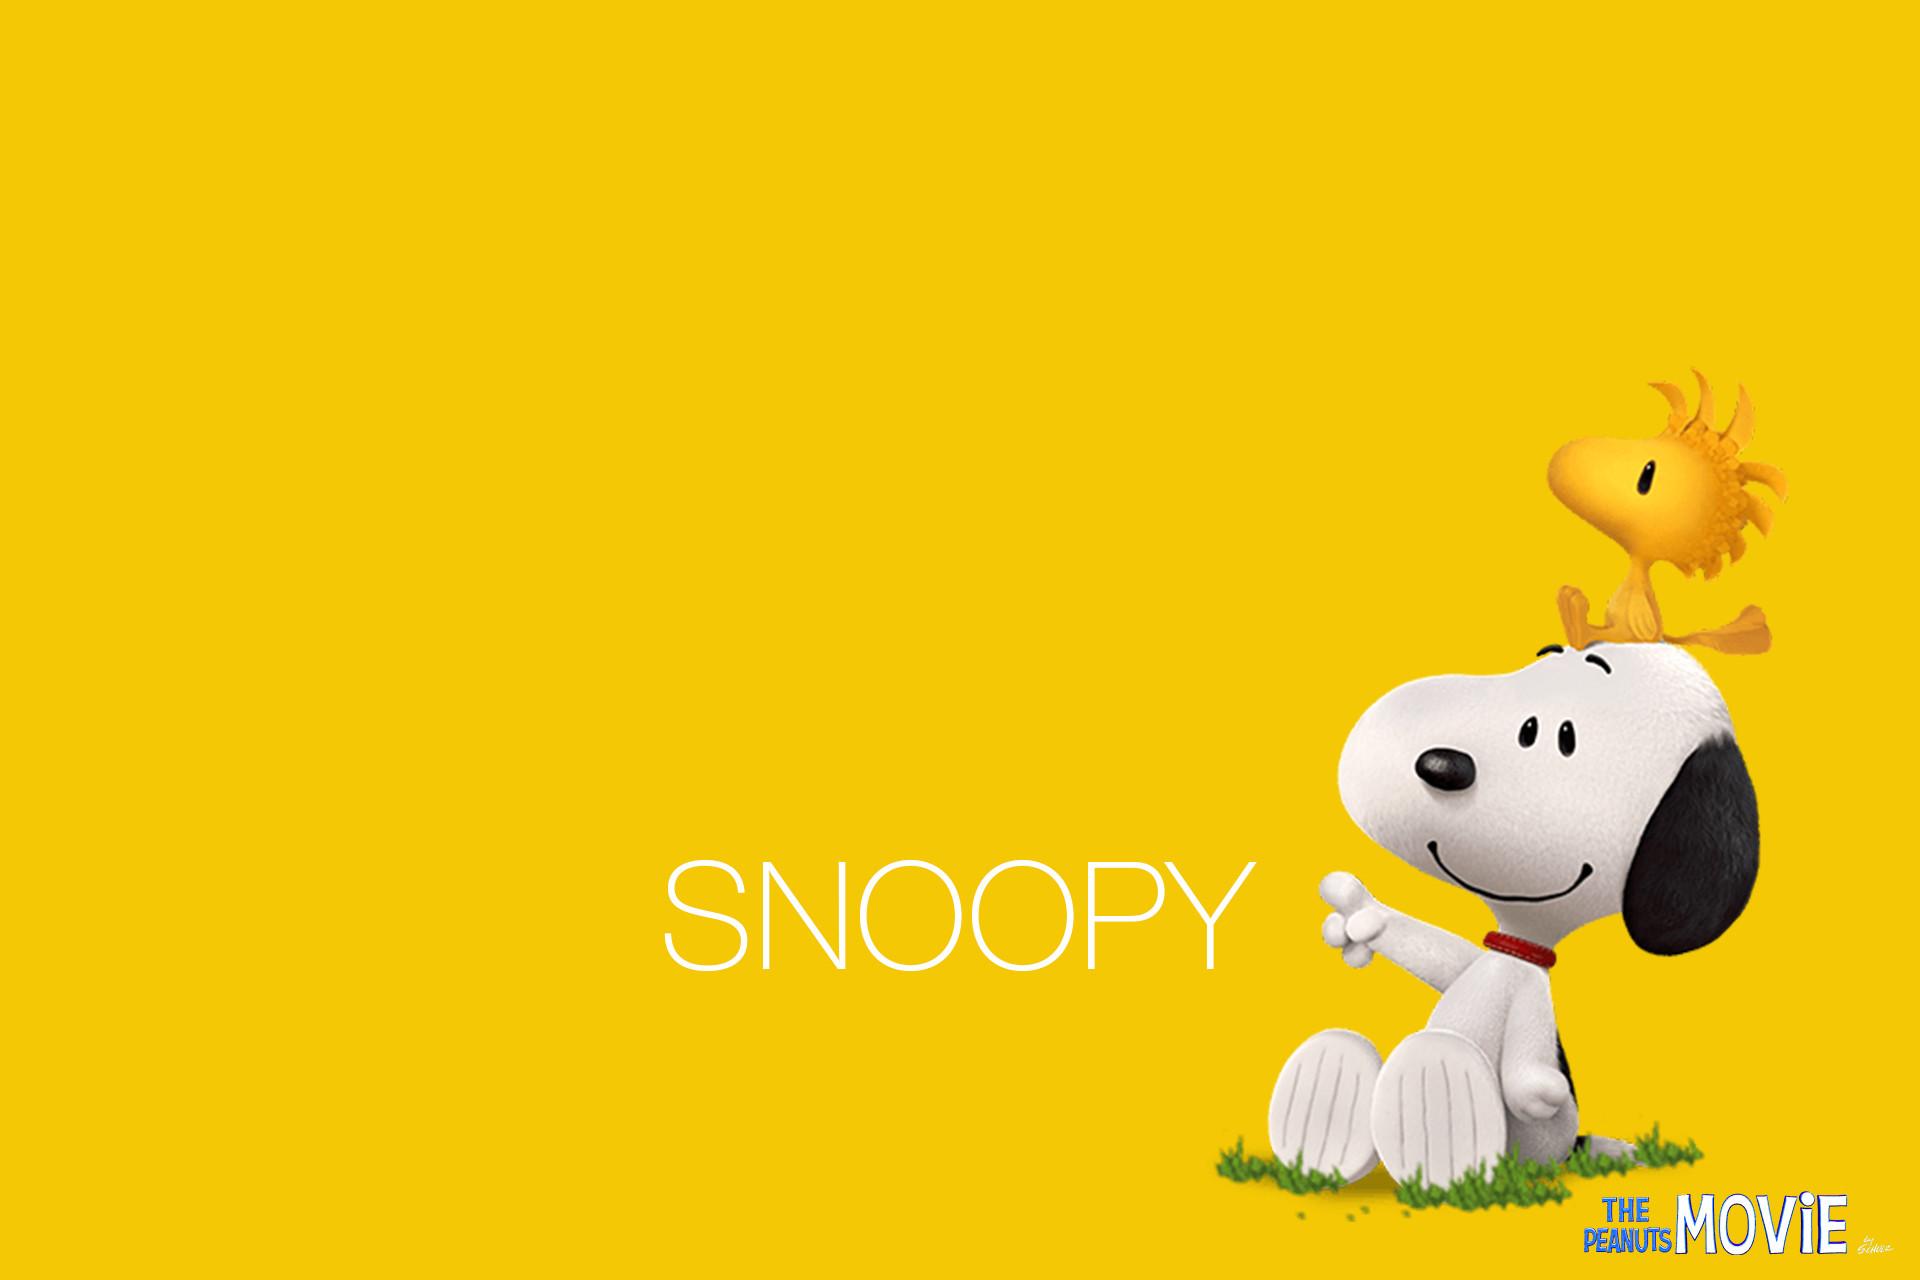 1920x1280 Peanuts images Snoopy HD wallpaper and background photos